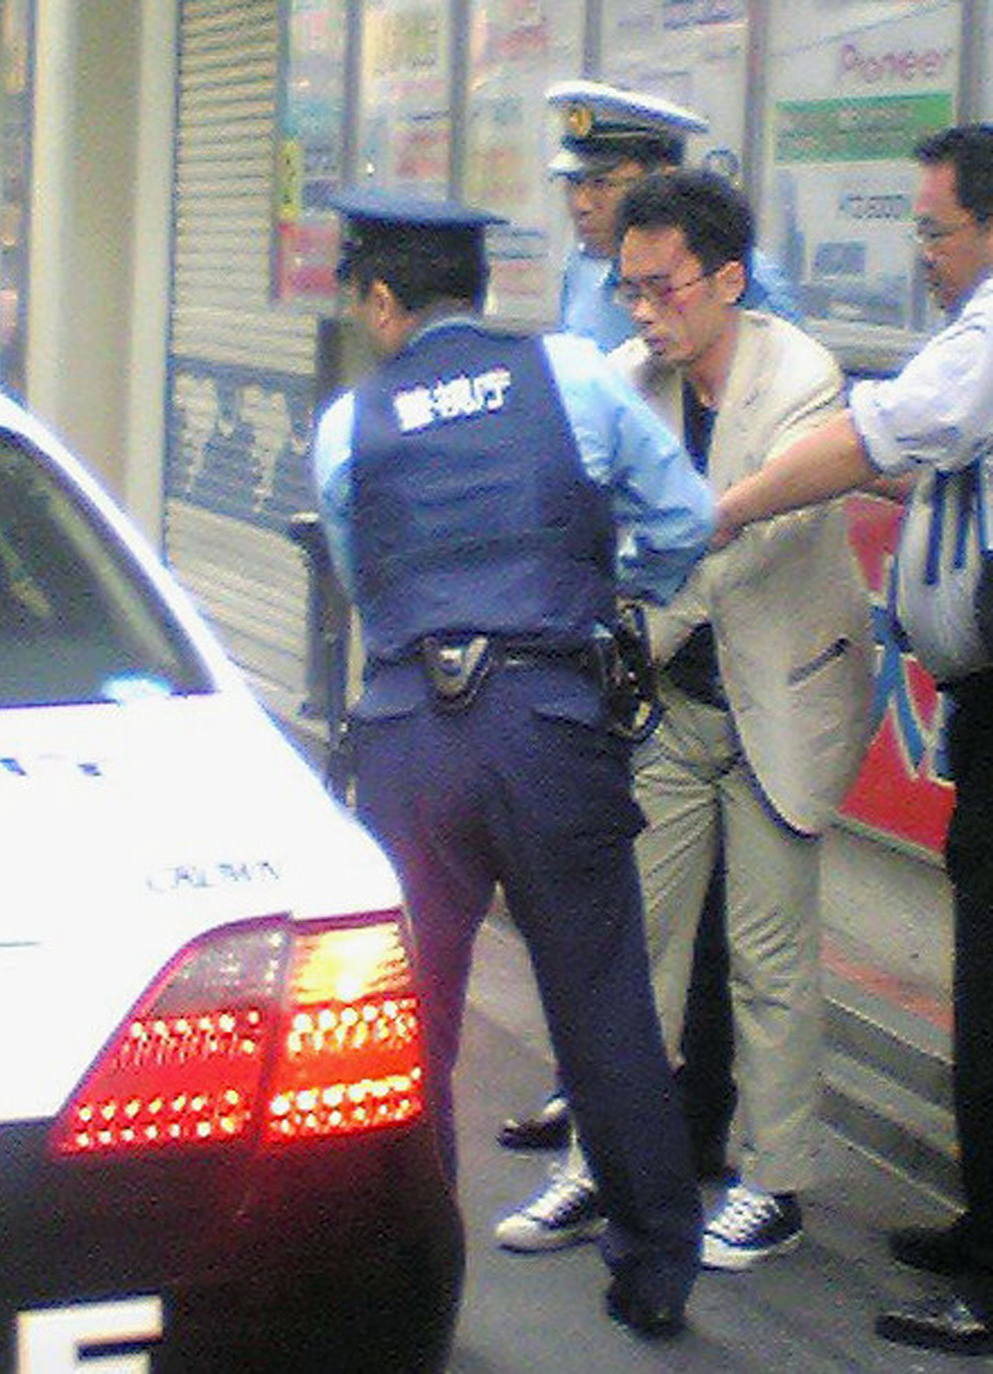 Time of Tomohiro Kato's arrest after carrying out the attack, in 2008